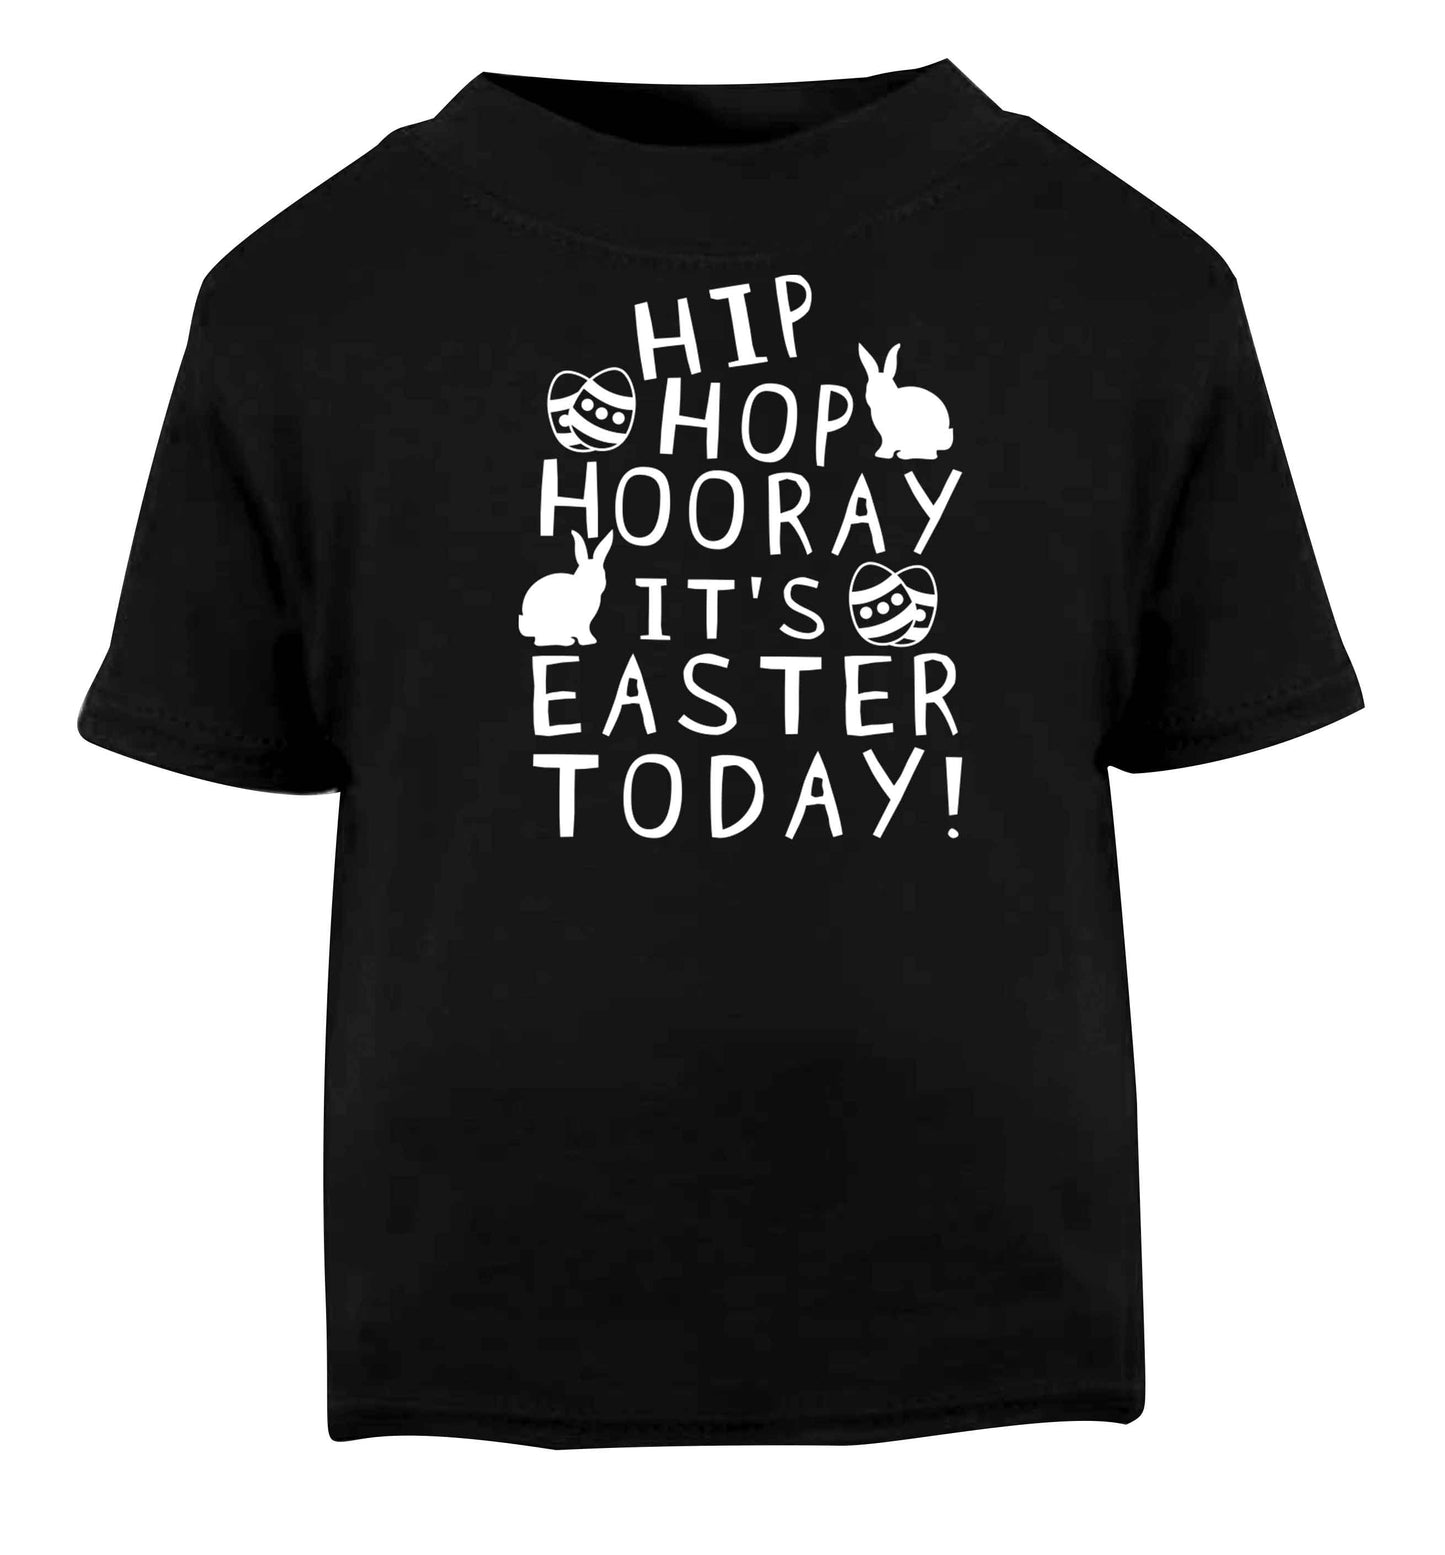 Hip hip hooray it's Easter today! Black baby toddler Tshirt 2 years